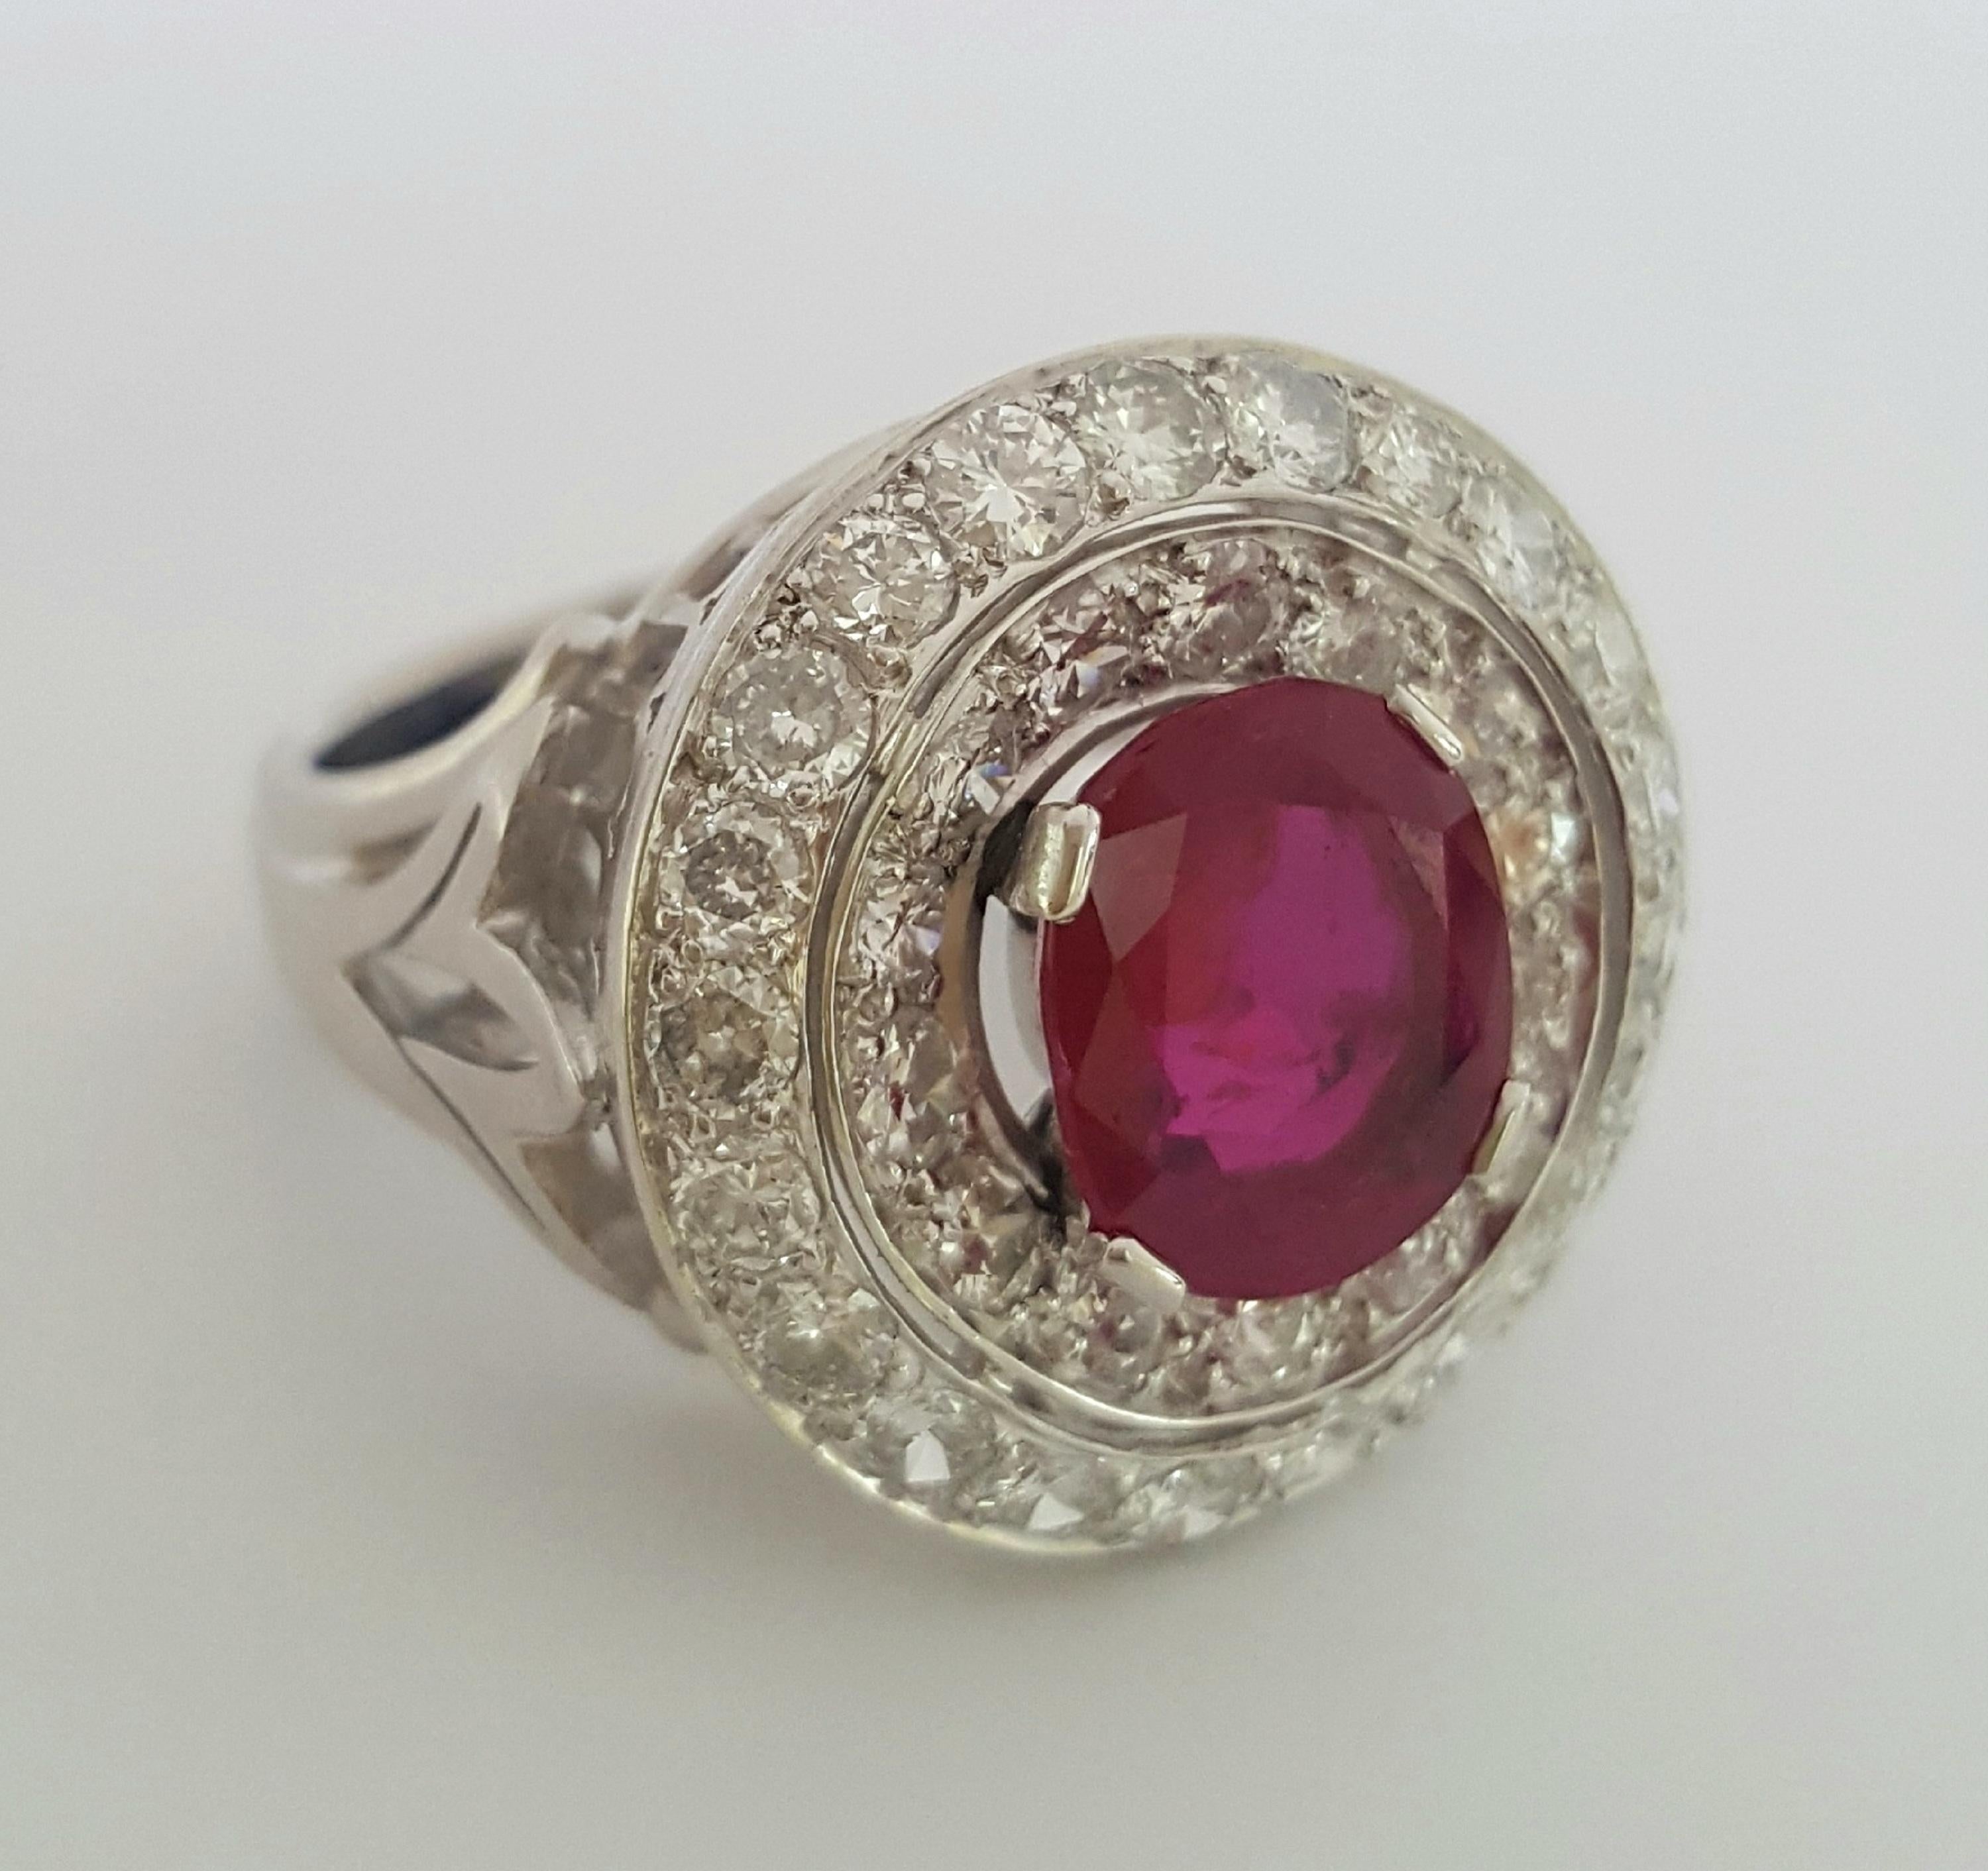 This crisp, elegant and polished ring designed and created by Moguldiam Inc features a SSEF certified oval brilliant purplish red ruby burma no heat encircled with a row of white small round brilliant diamonds and another row of bigger white round